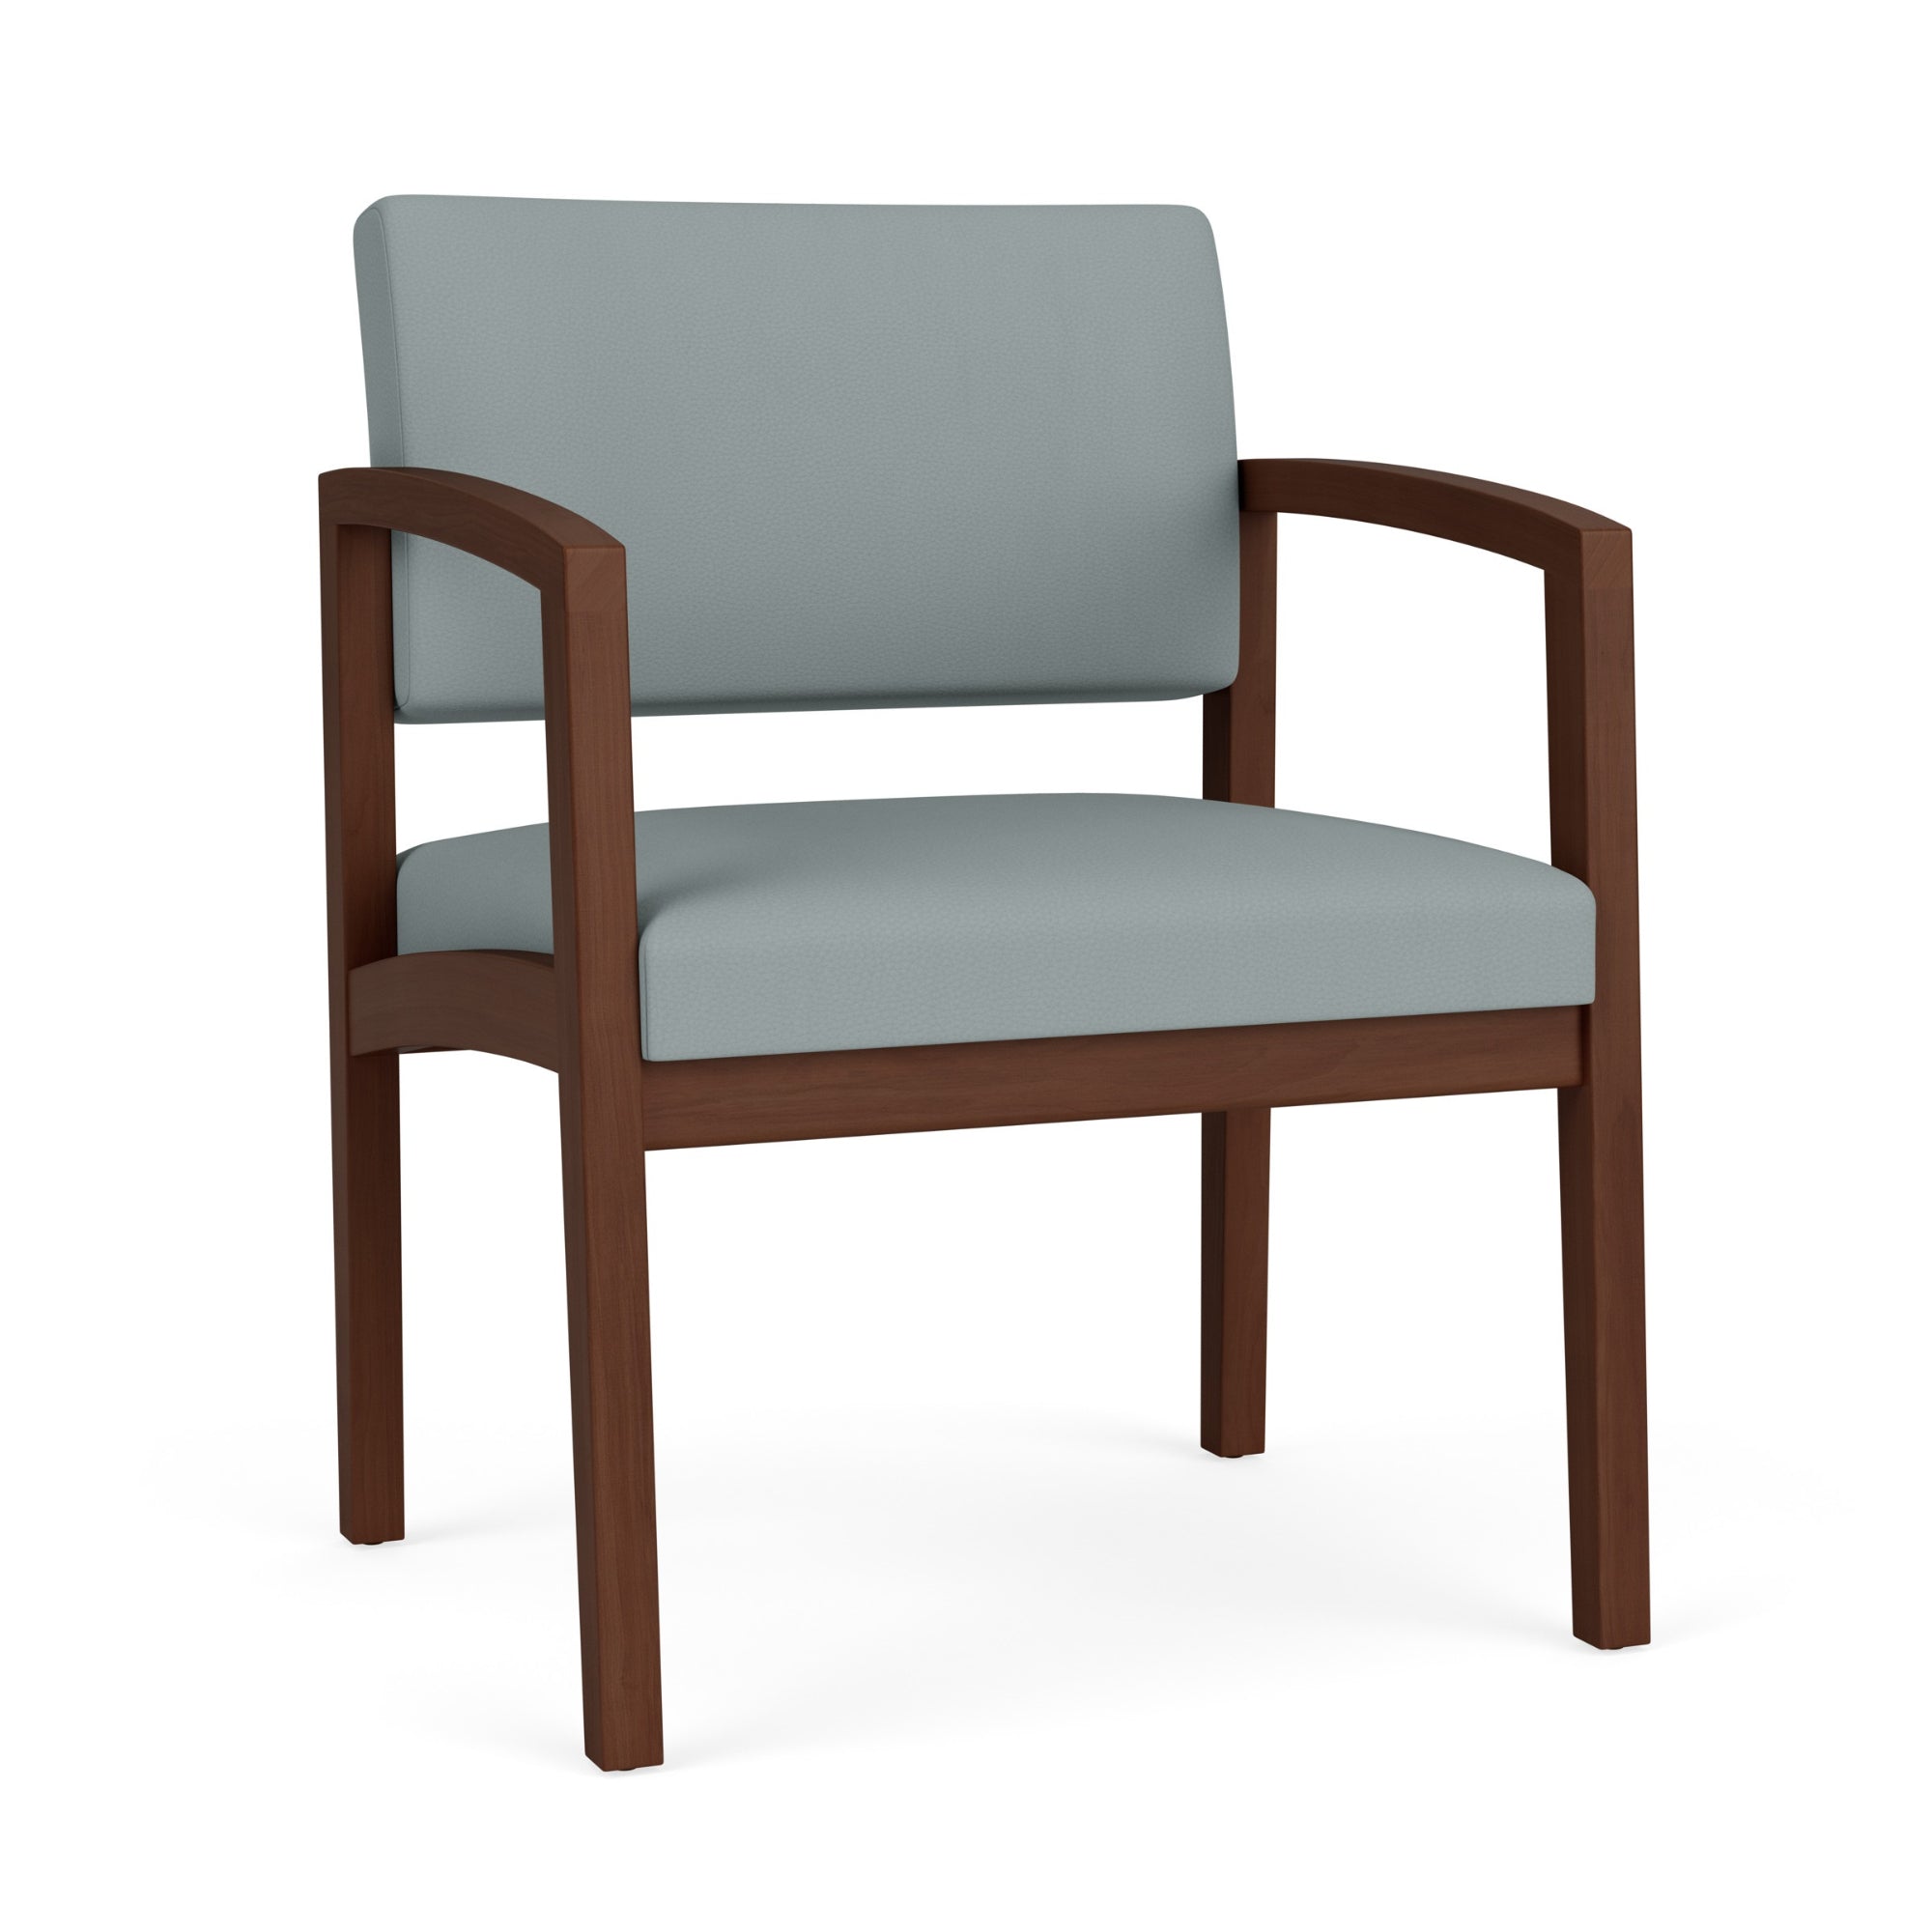 Lenox Wood Collection Reception Seating, Oversize Guest Chair, 400 lb. Capacity, Healthcare Vinyl Upholstery, FREE SHIPPING